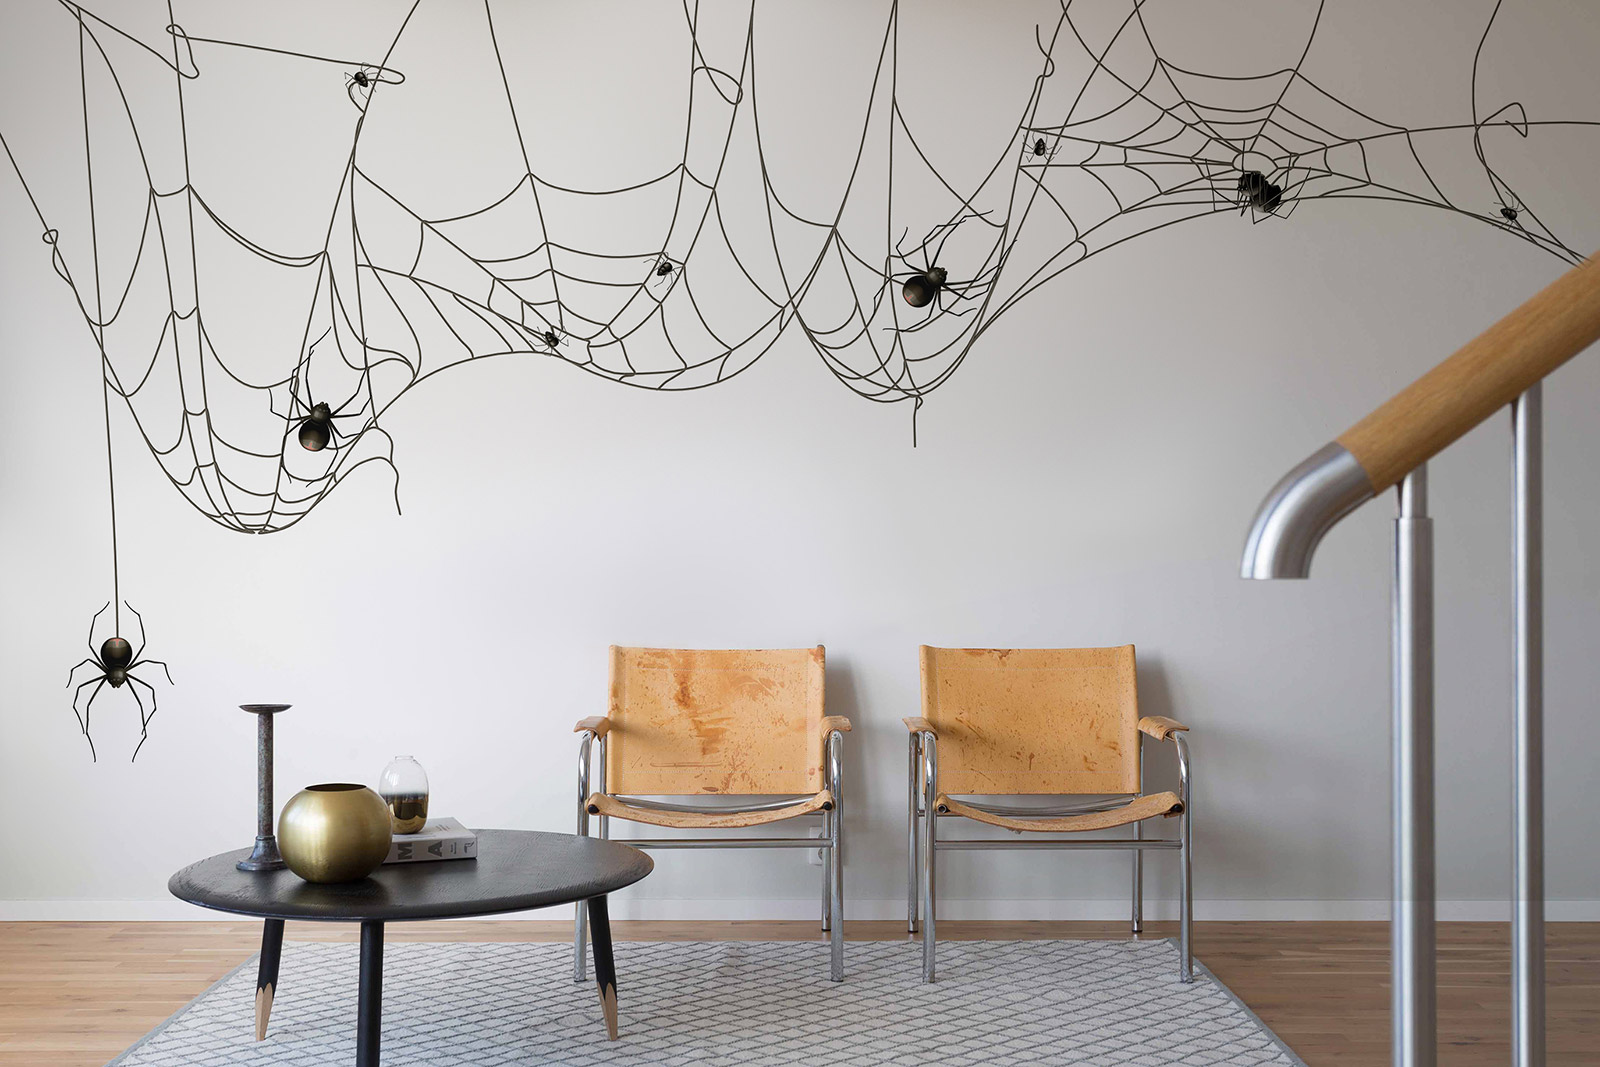 Mysterious & Cool: Halloween Removable Wall Decor ...